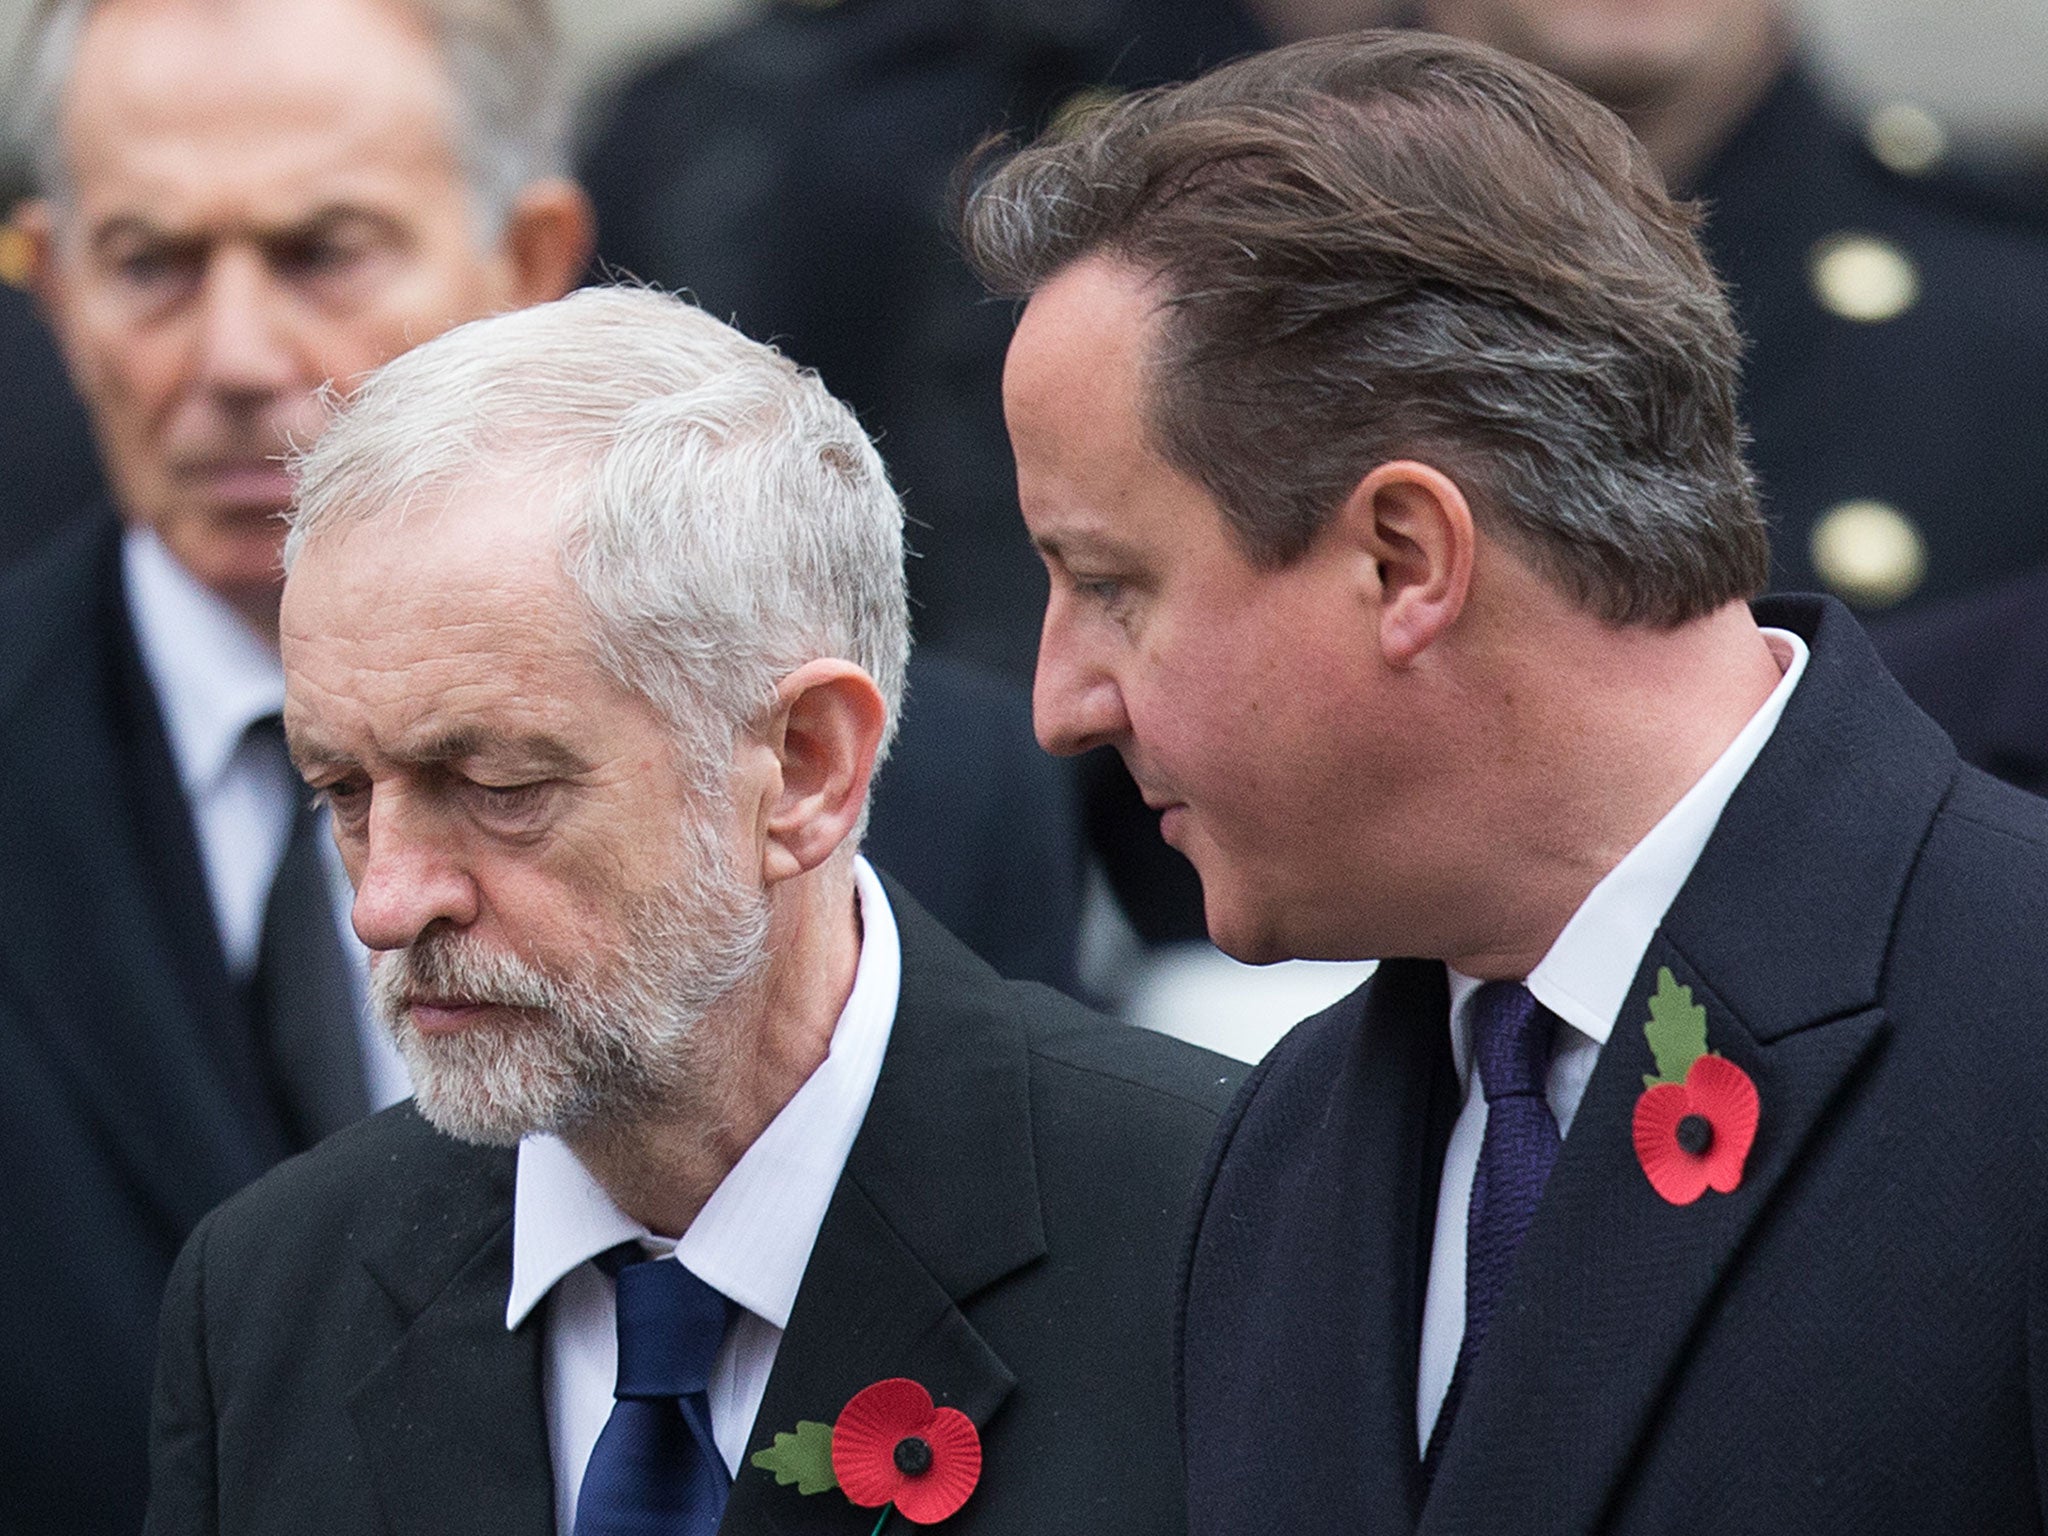 Labour leader Jeremy Corbyn and British Prime Minister David Cameron attend the annual Remembrance